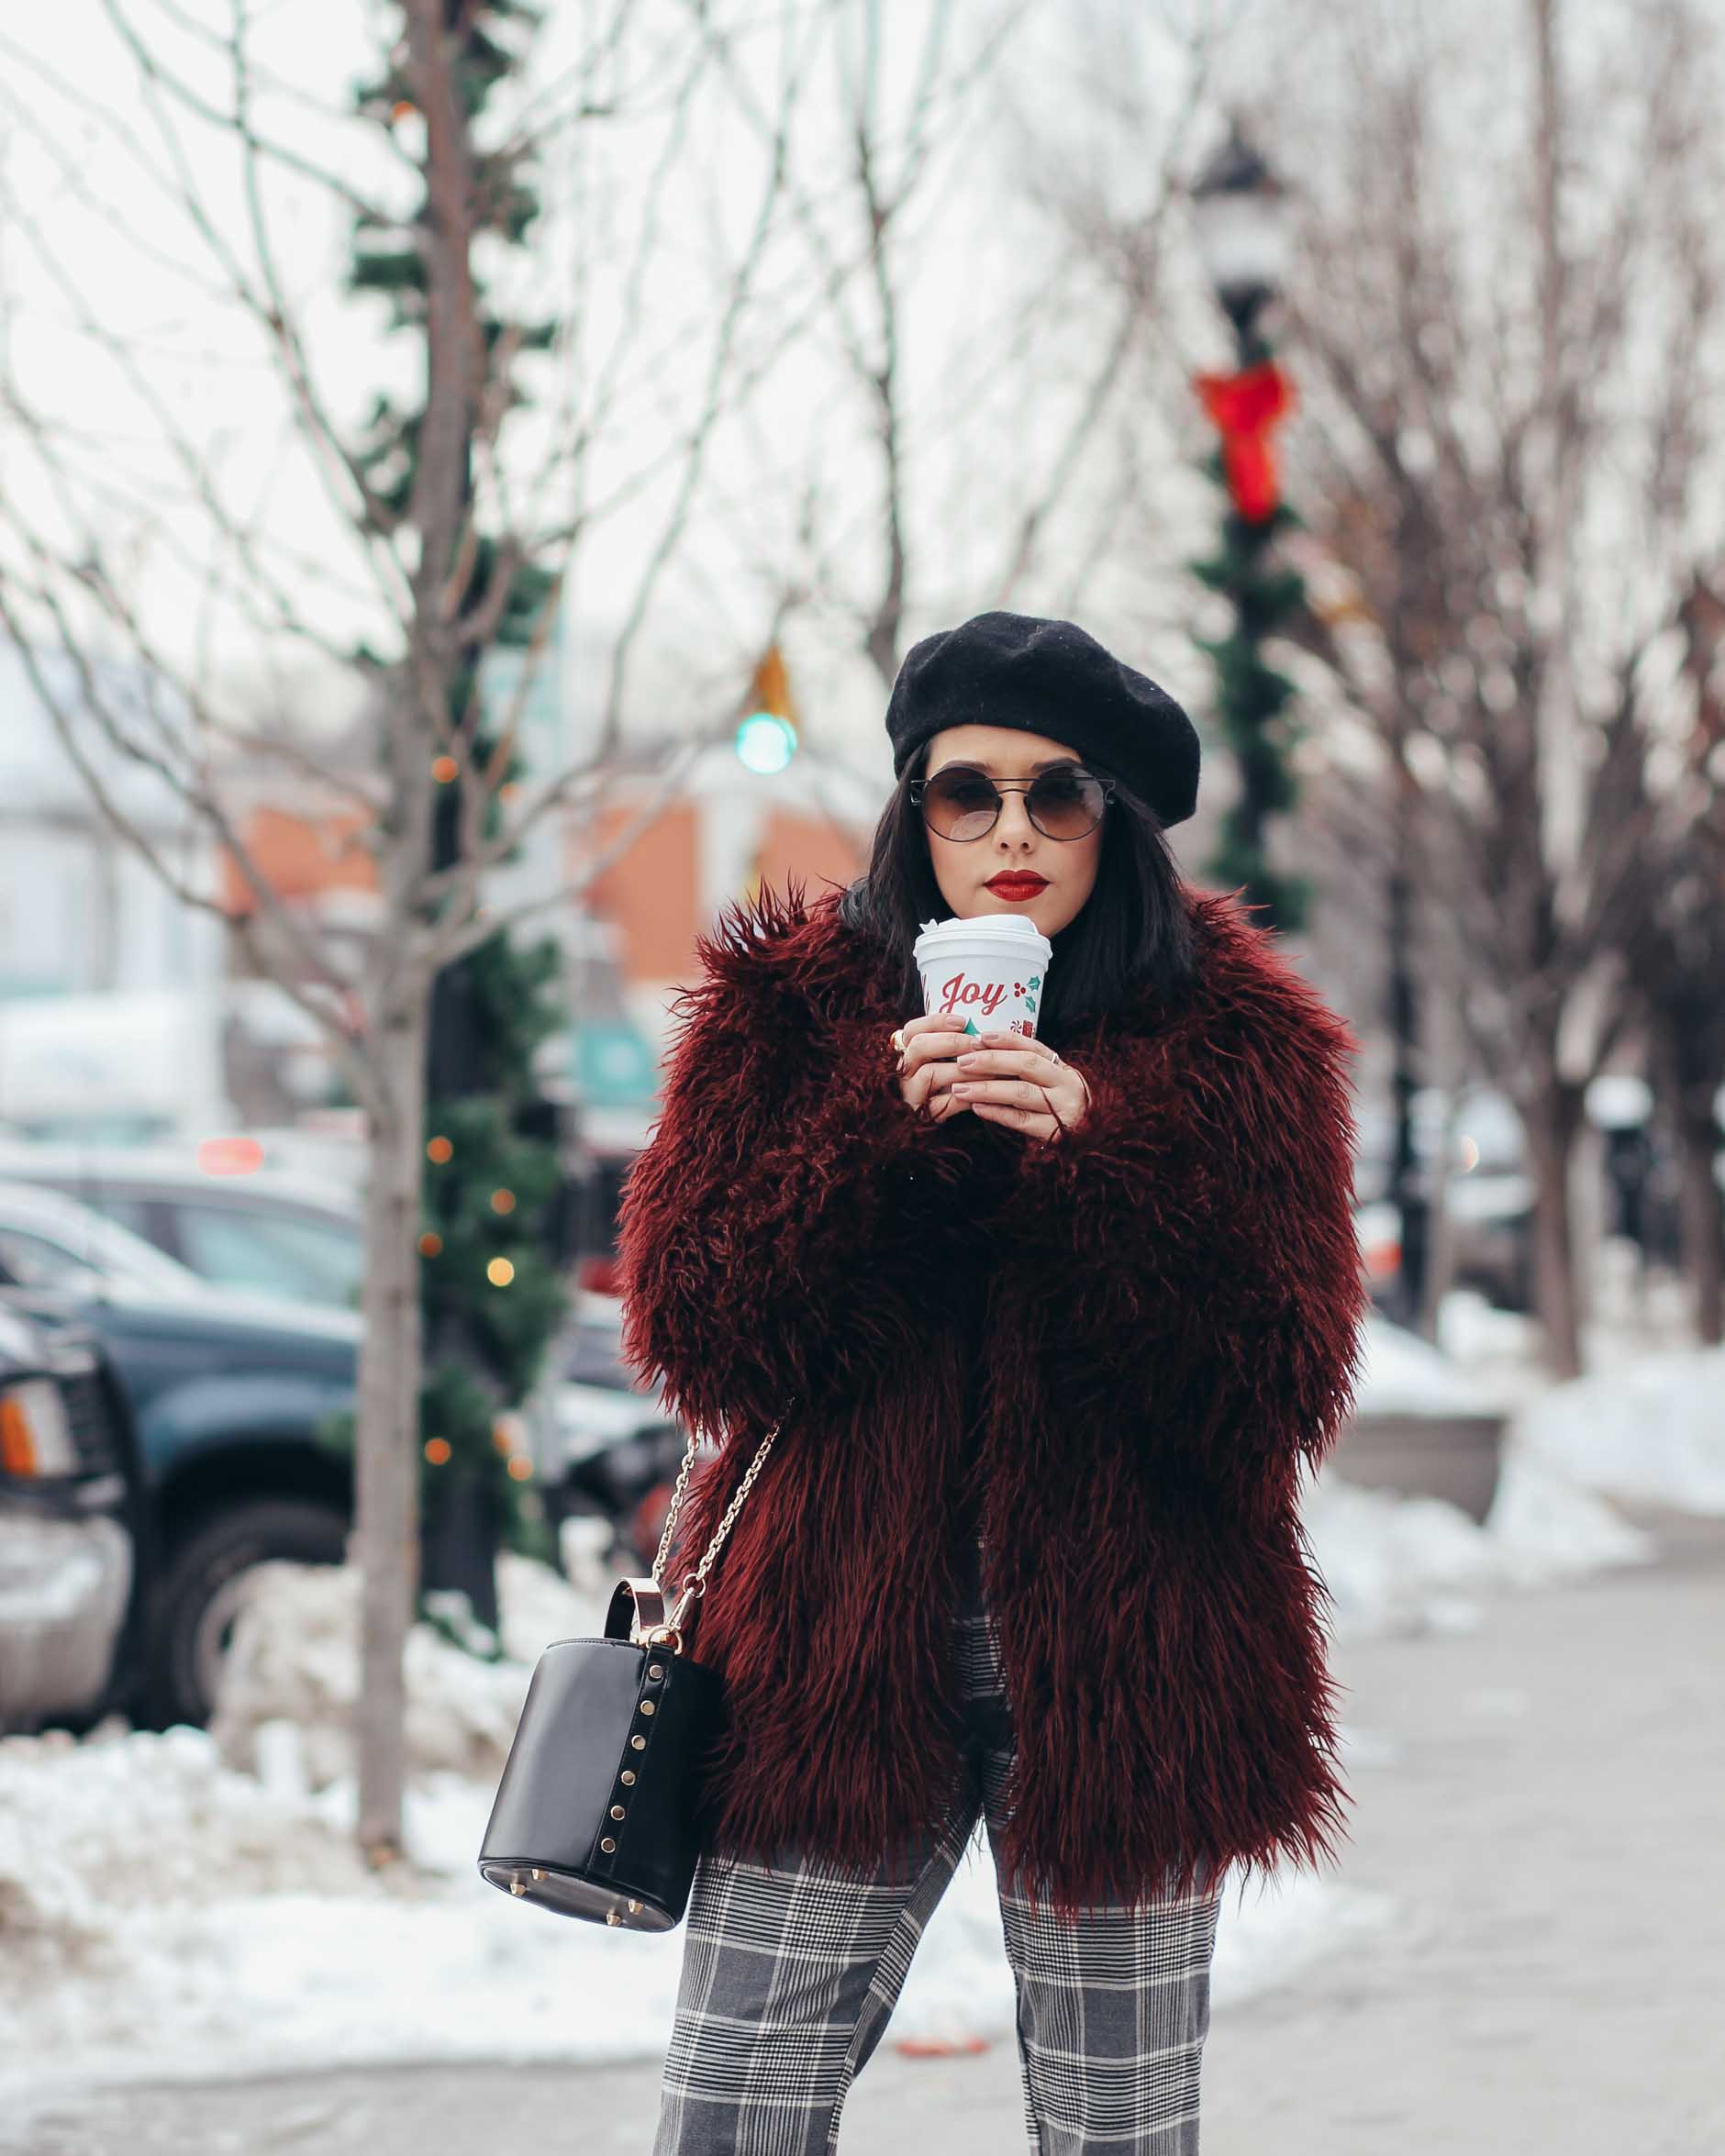 lifestyle blogger naty michele wearing faux fur coat and beret